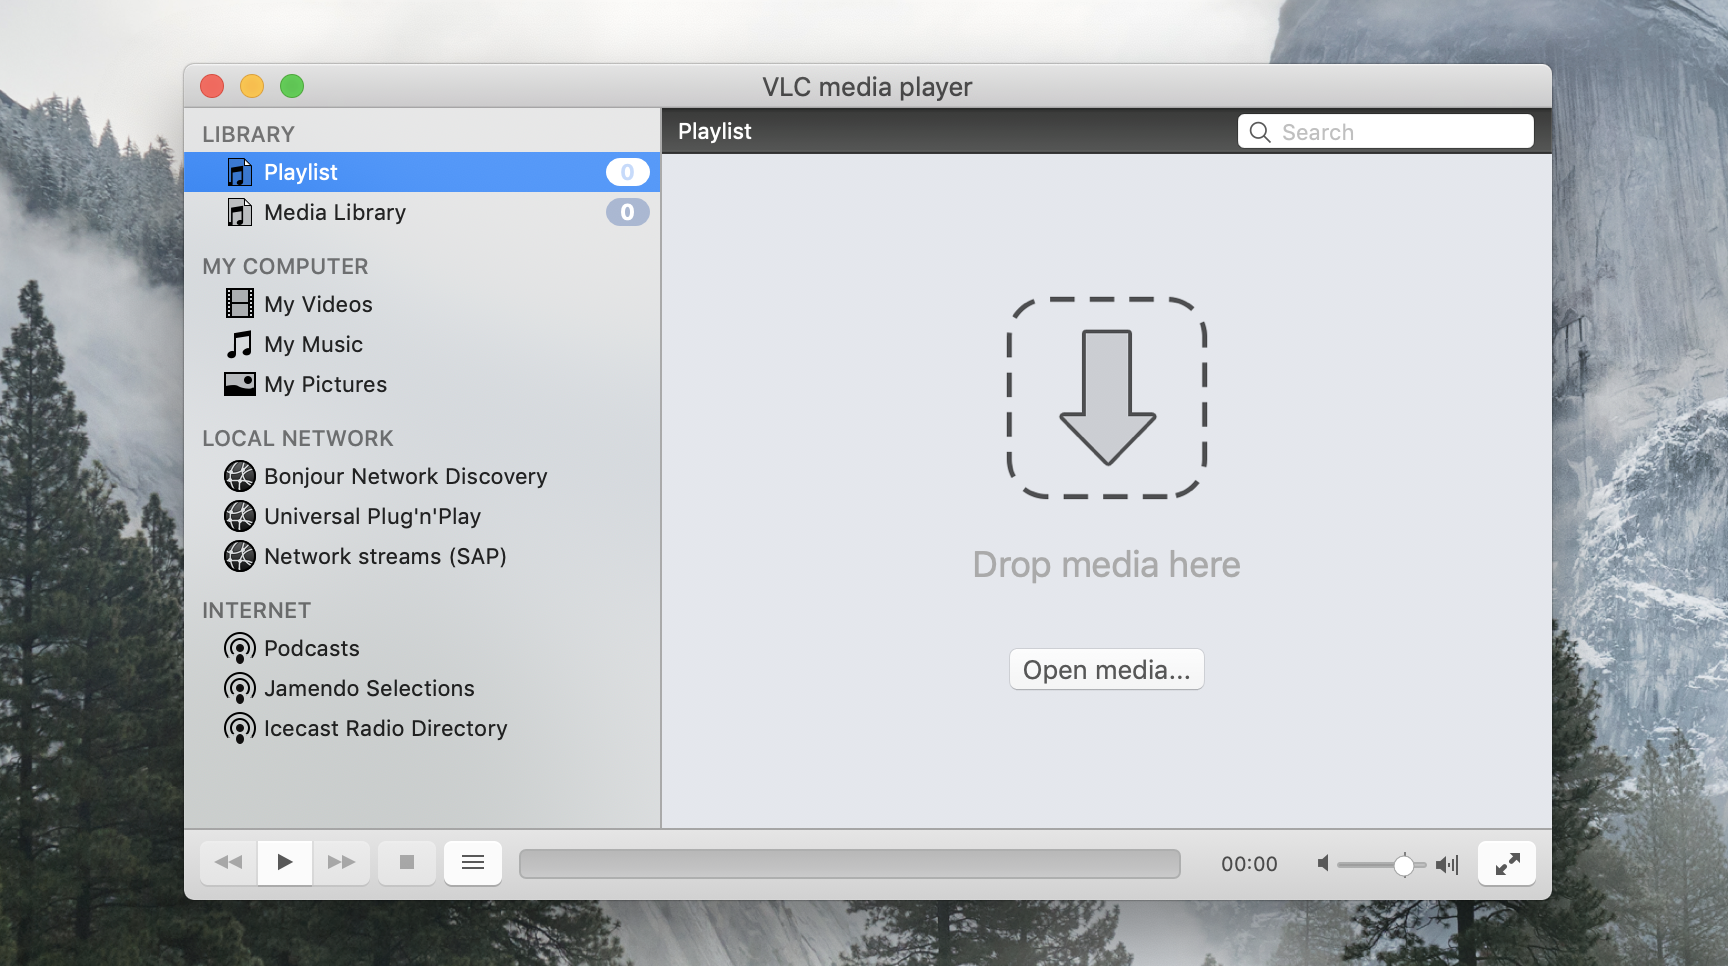 how to make vlc the default player on mac